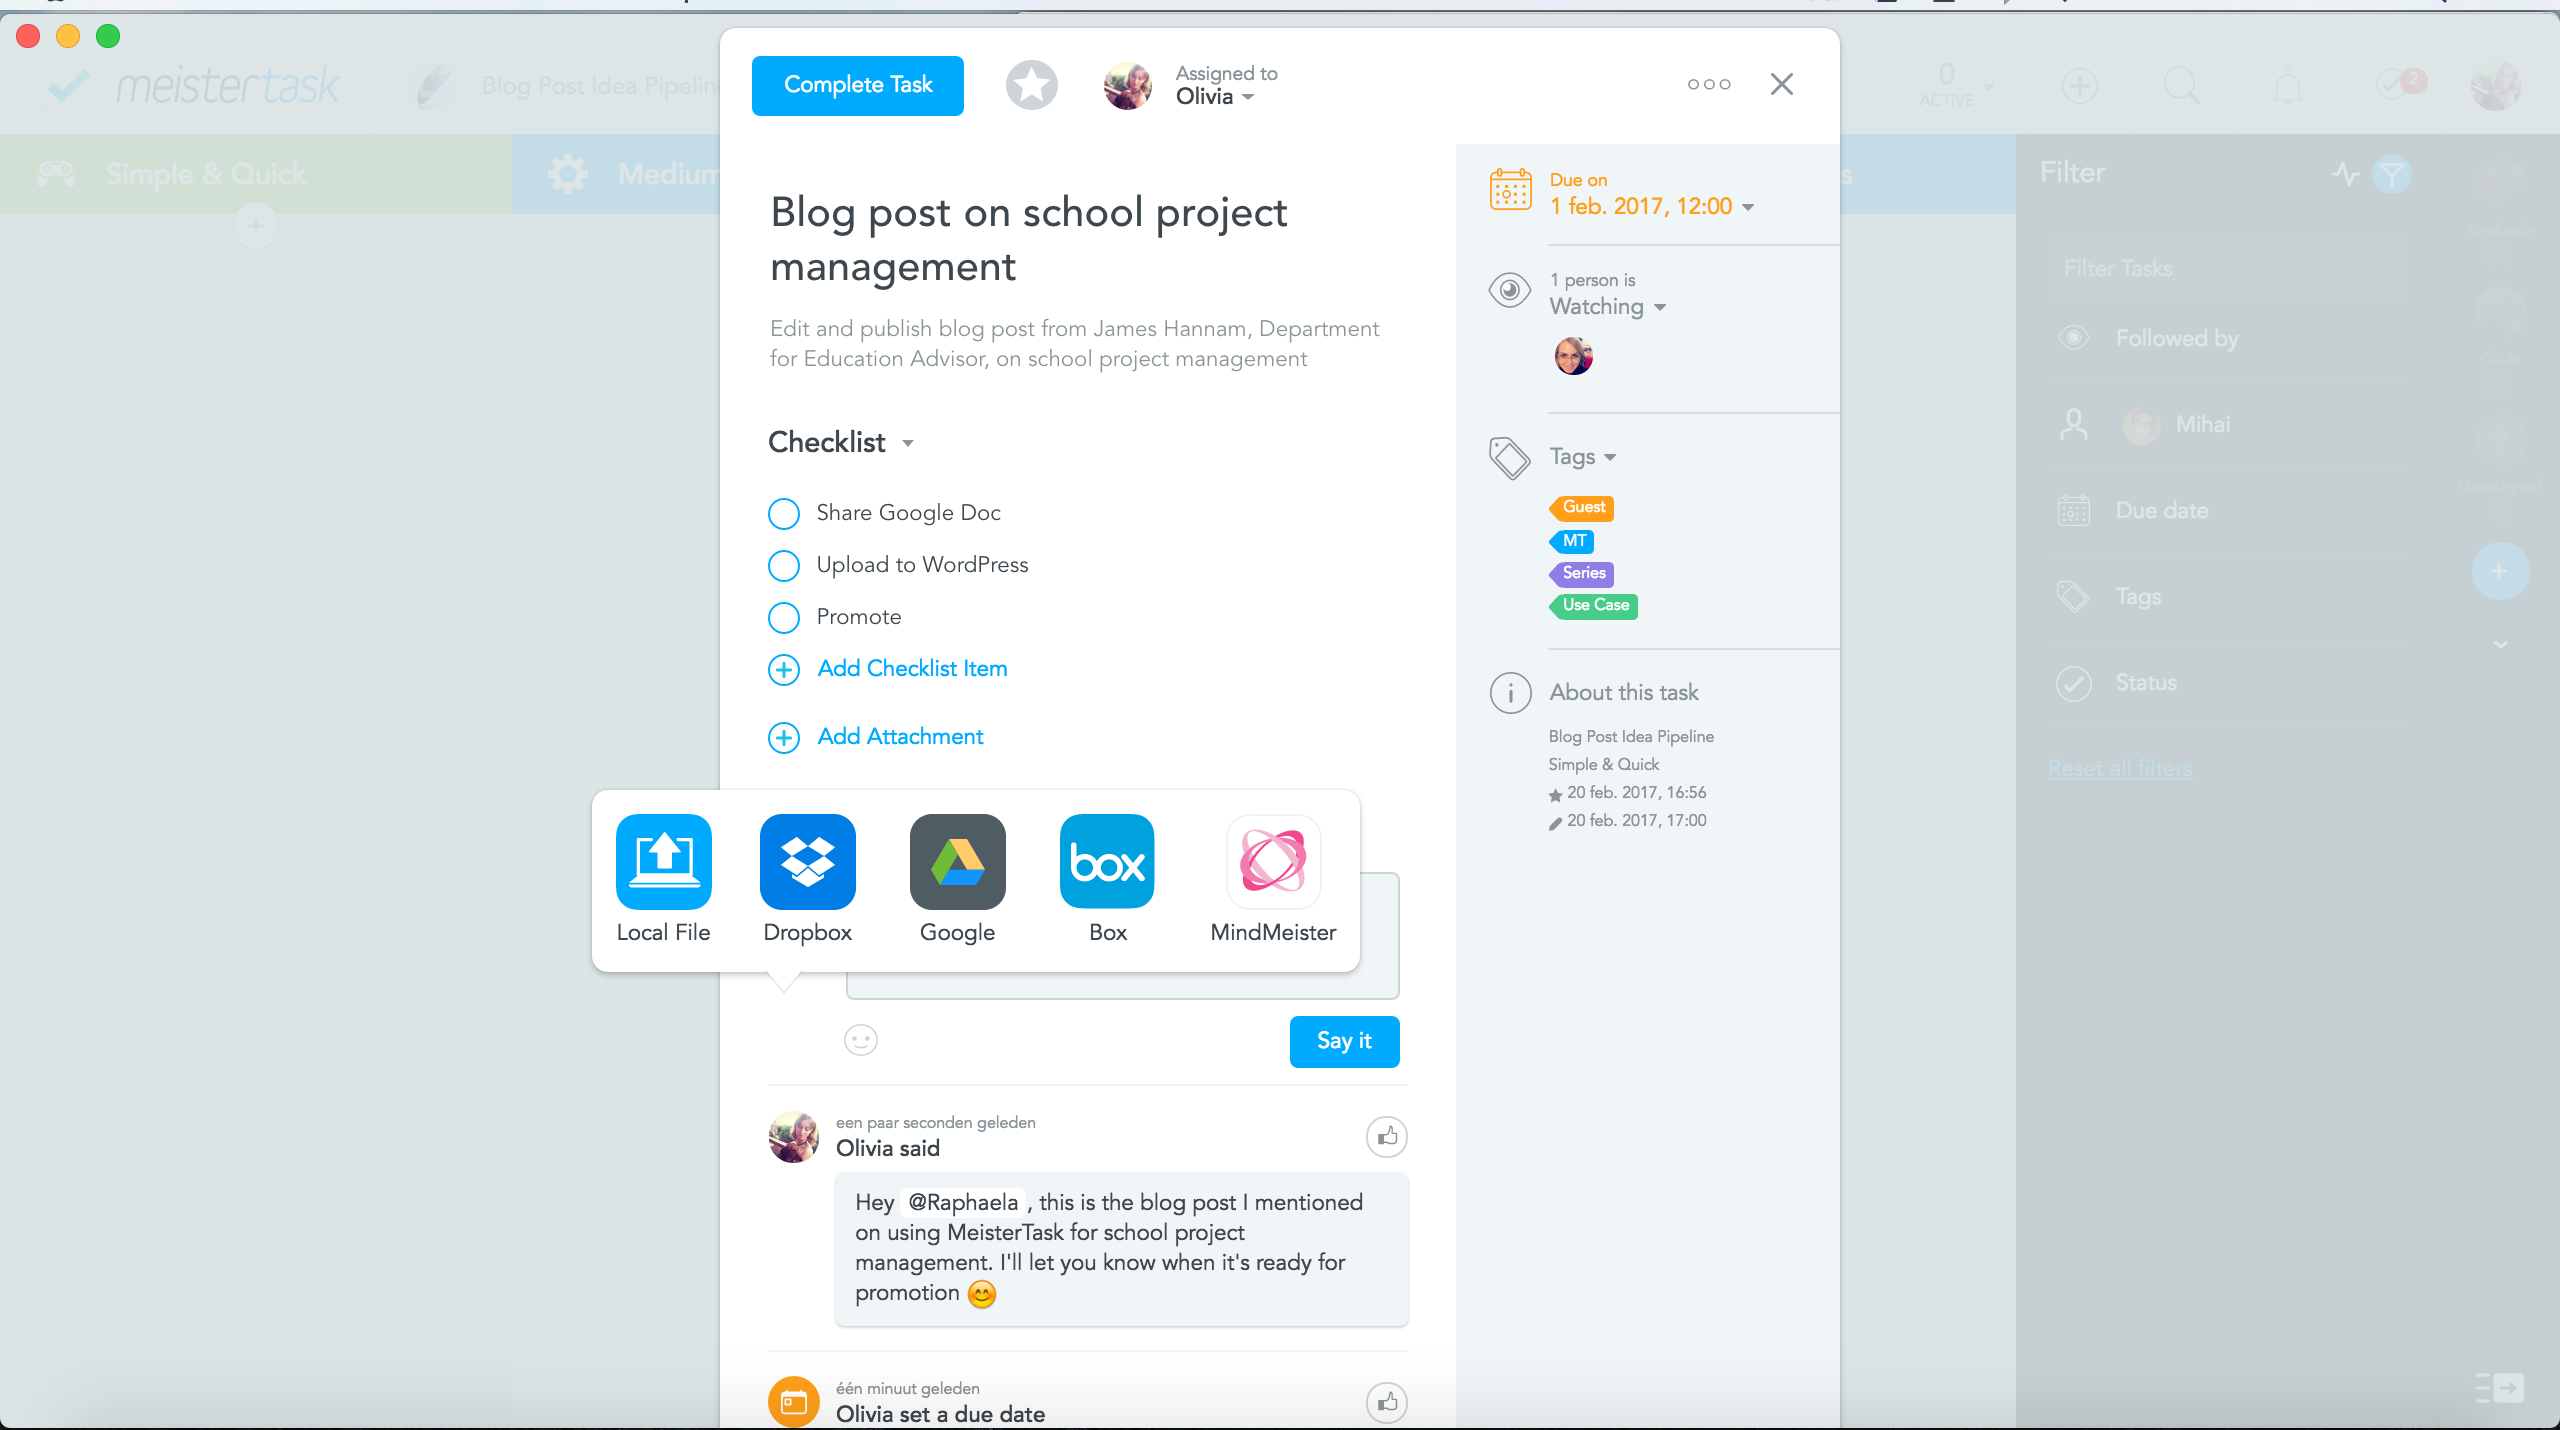 School project management with MeisterTask - attach documents and collaborate